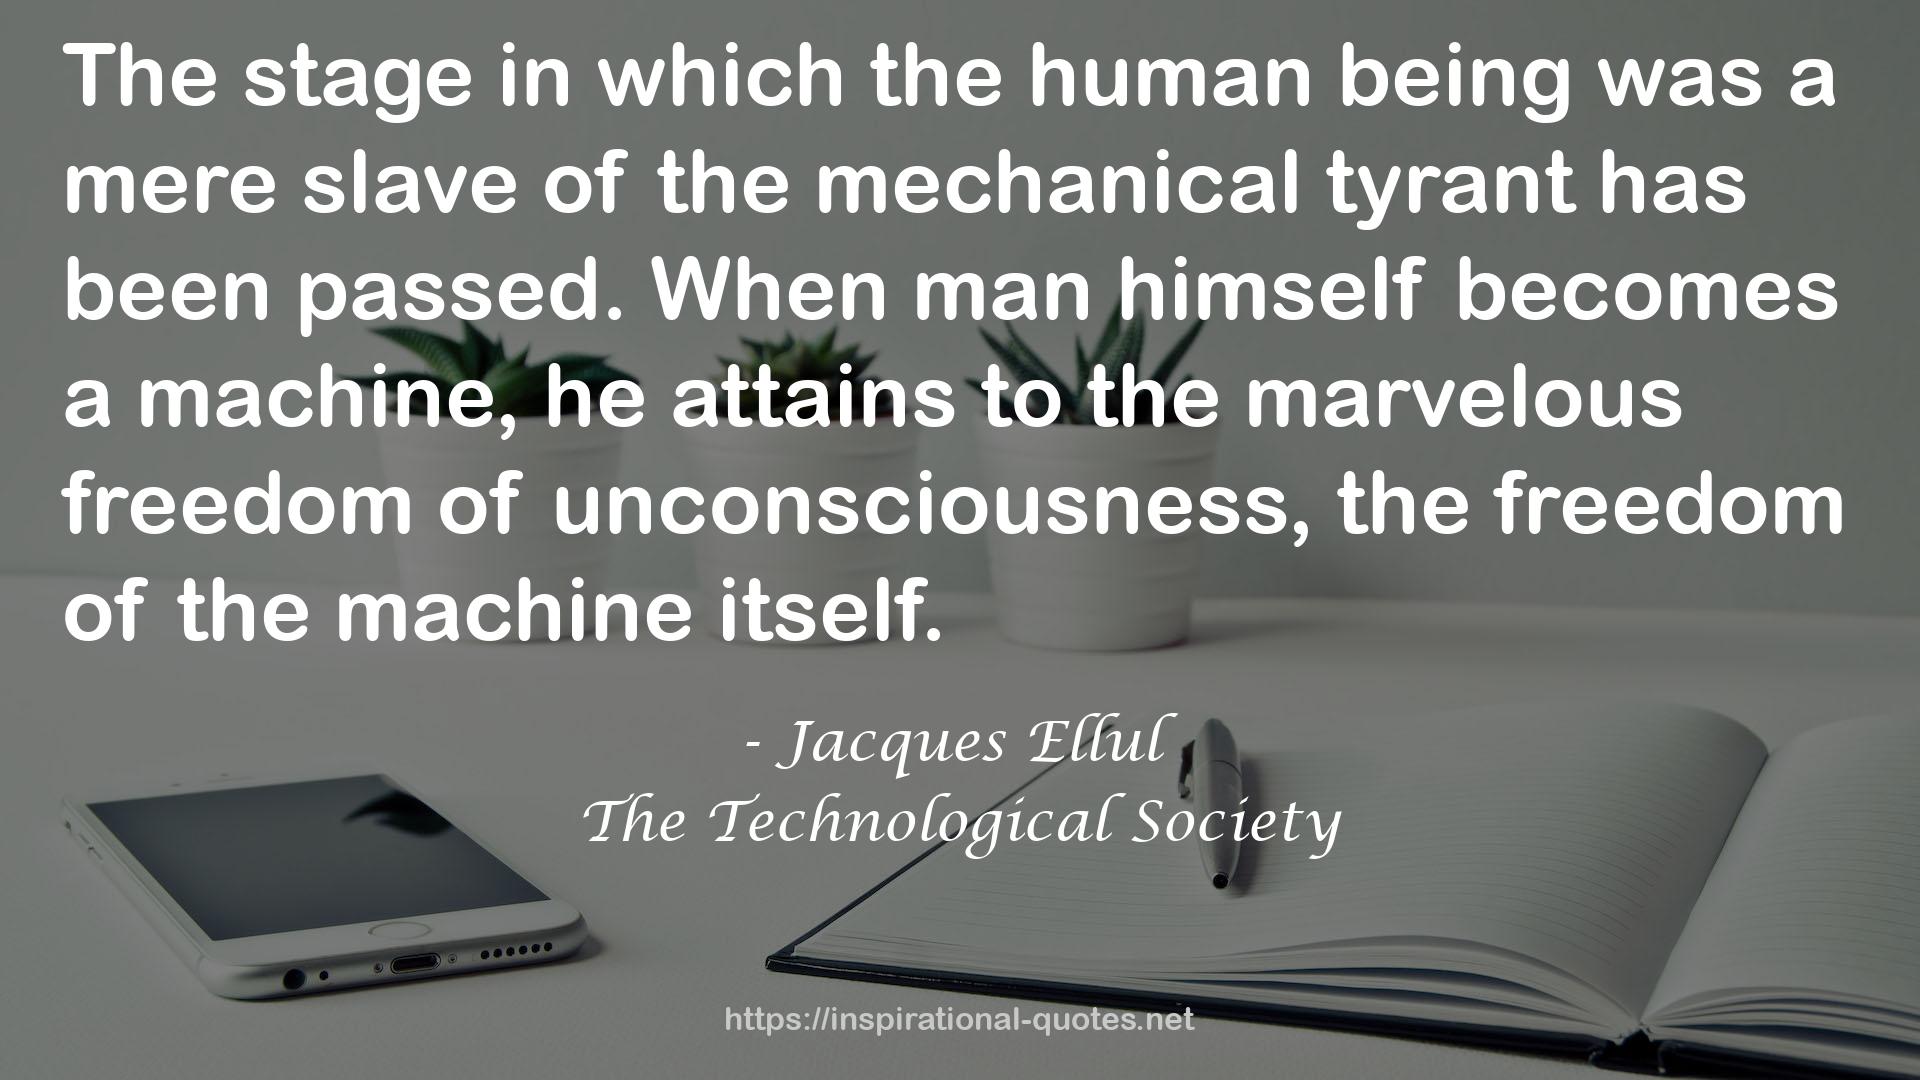 The Technological Society QUOTES